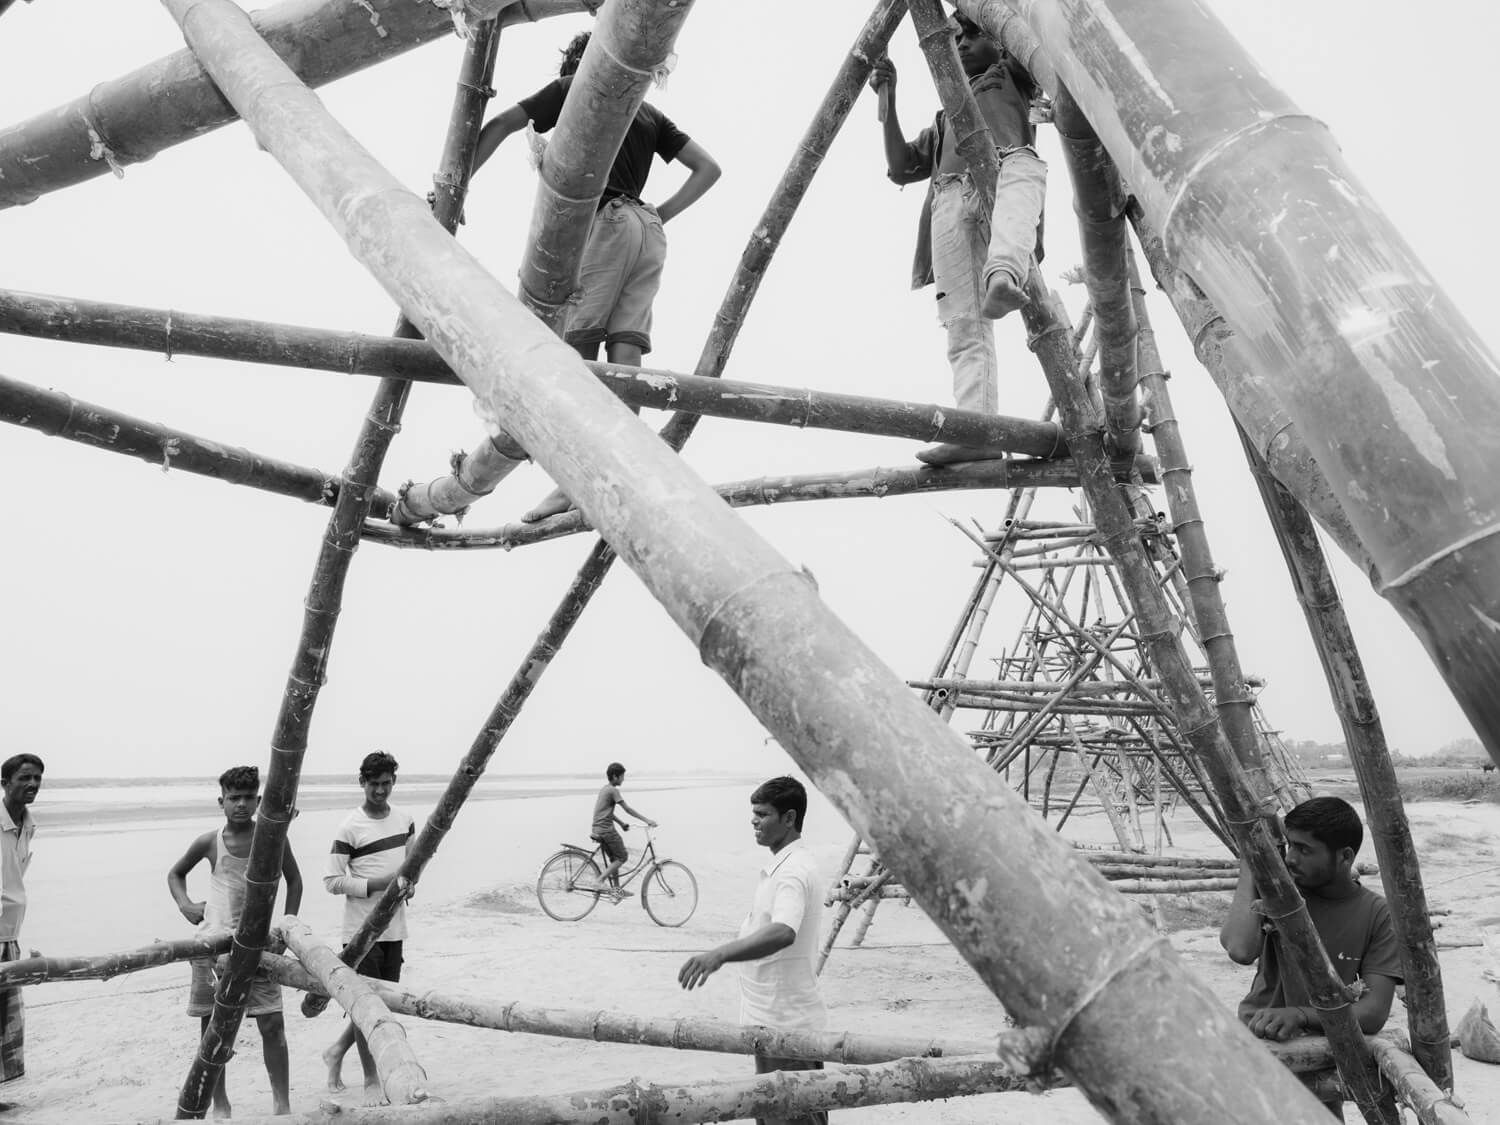 Men congregate socially on and around a large bamboo structure on a beach